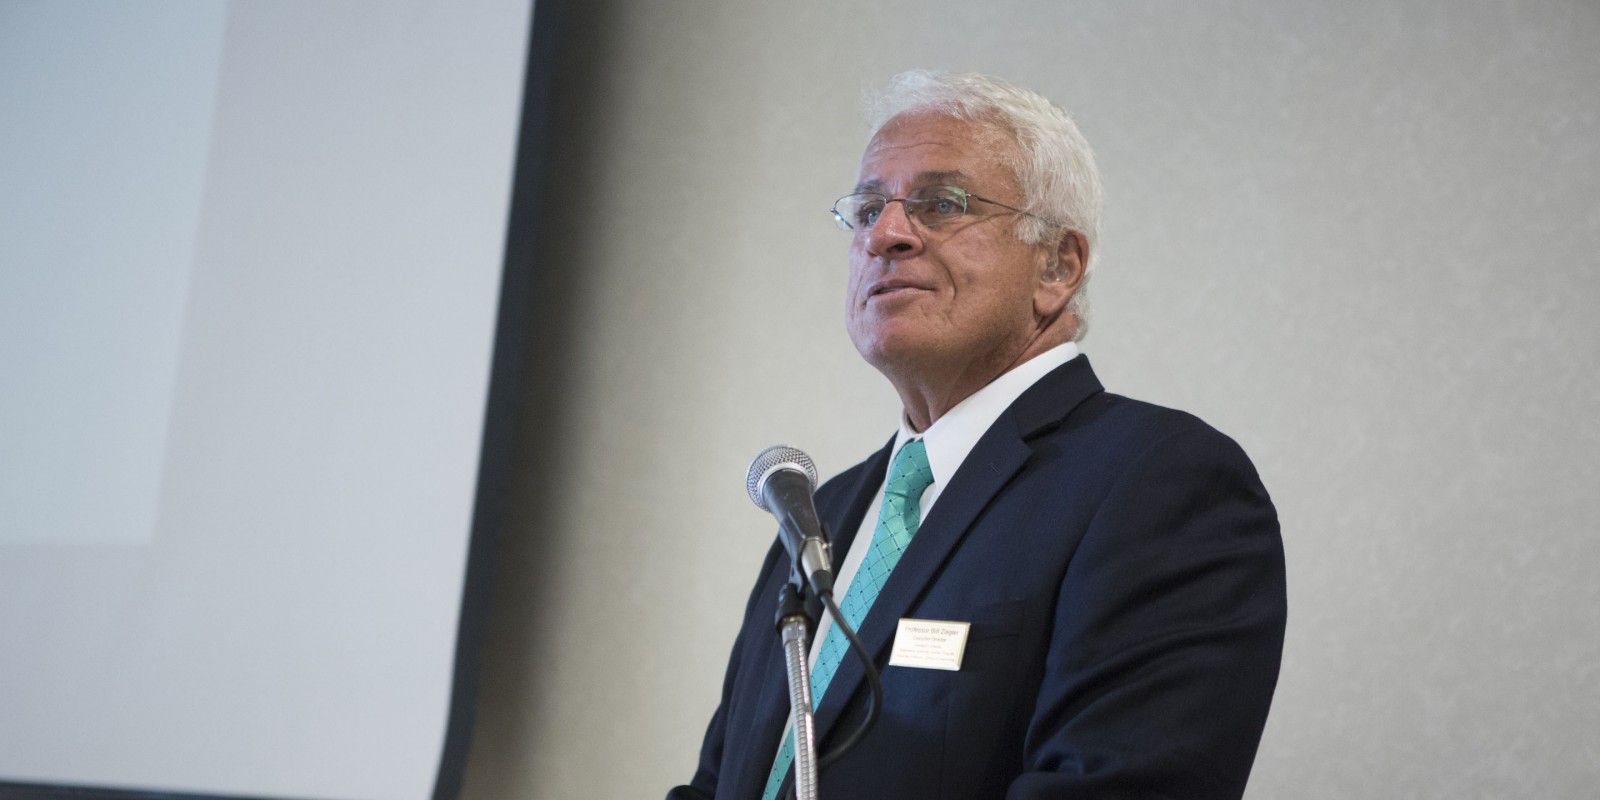 Bill Ziegler, executive director of the Binghamton University Scholars Program, shown here at a welcome brunch in 2014. will step down from the program later this year.